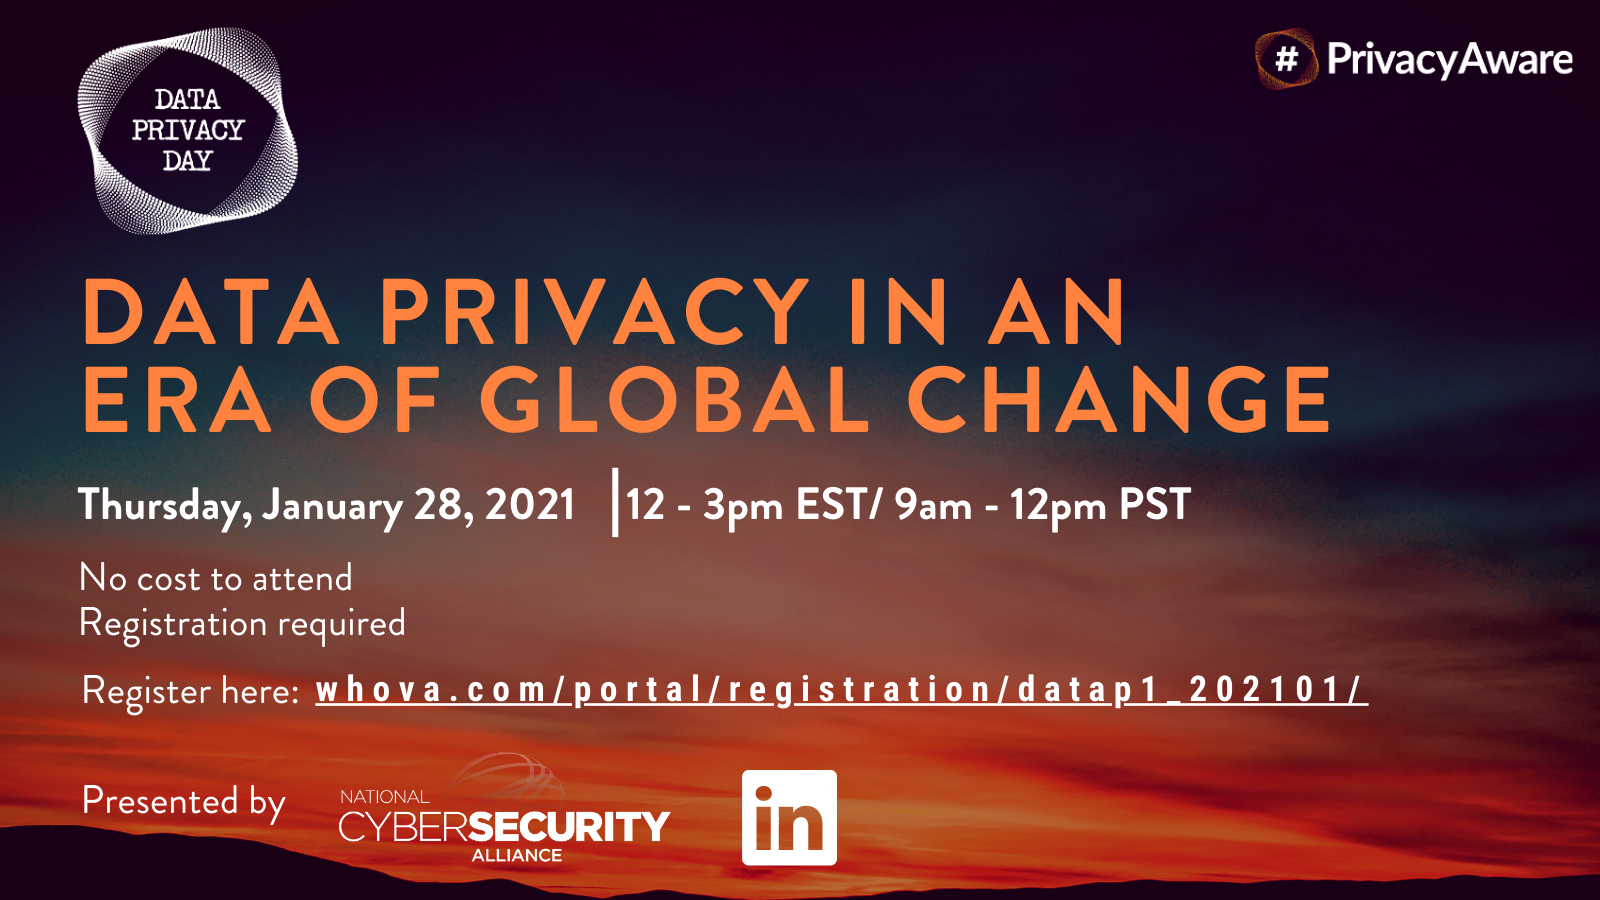 Data Privacy Day 2021: Data Privacy in an Era of Global Change